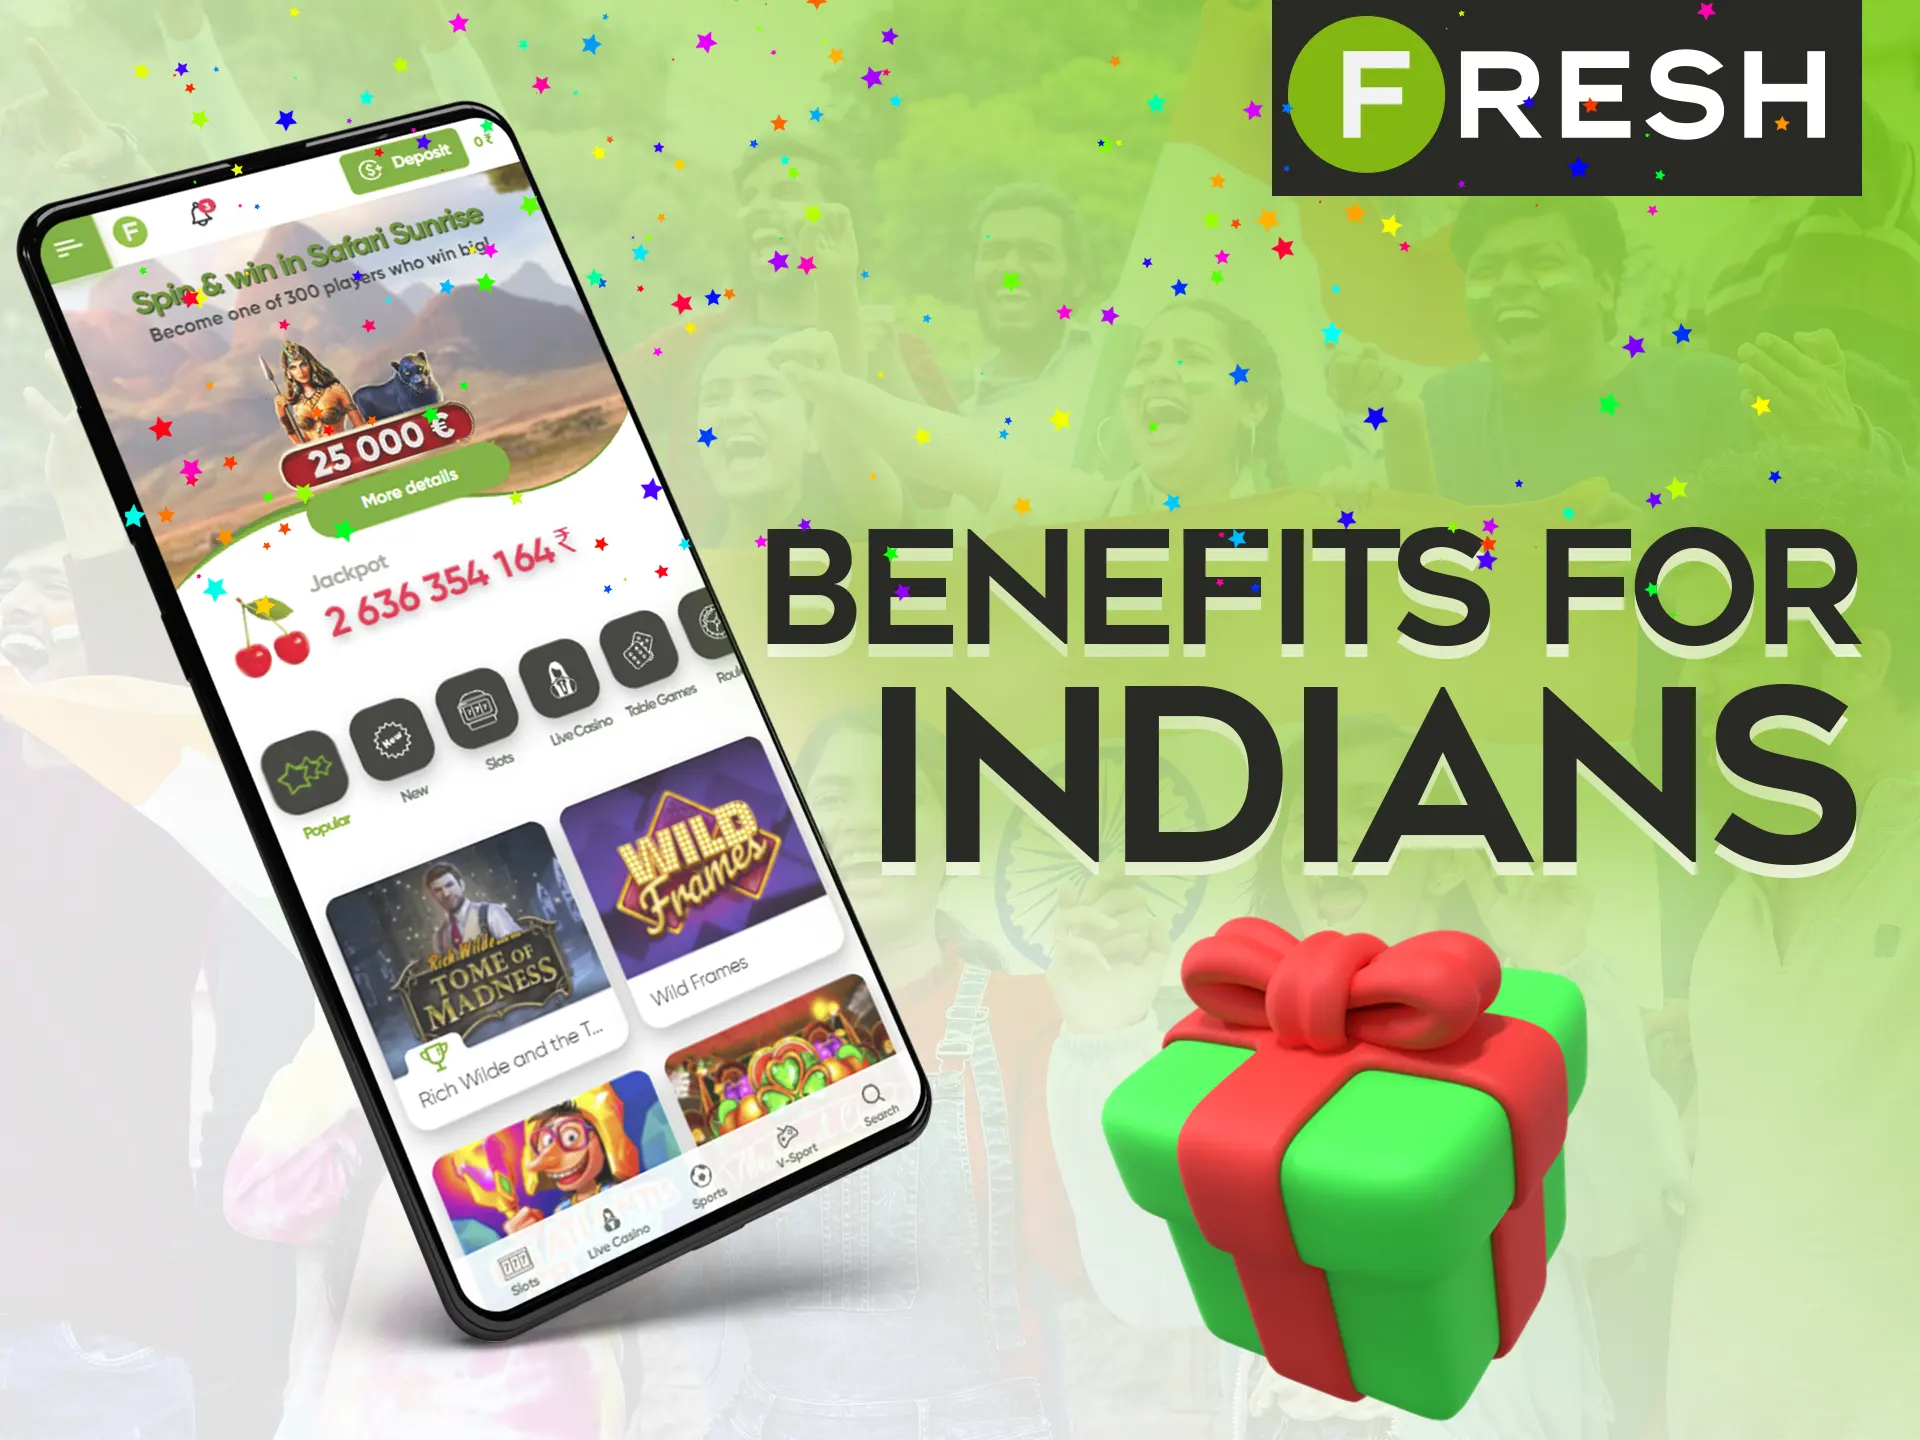 Get additional bonuses by using Fresh Casino app from India.